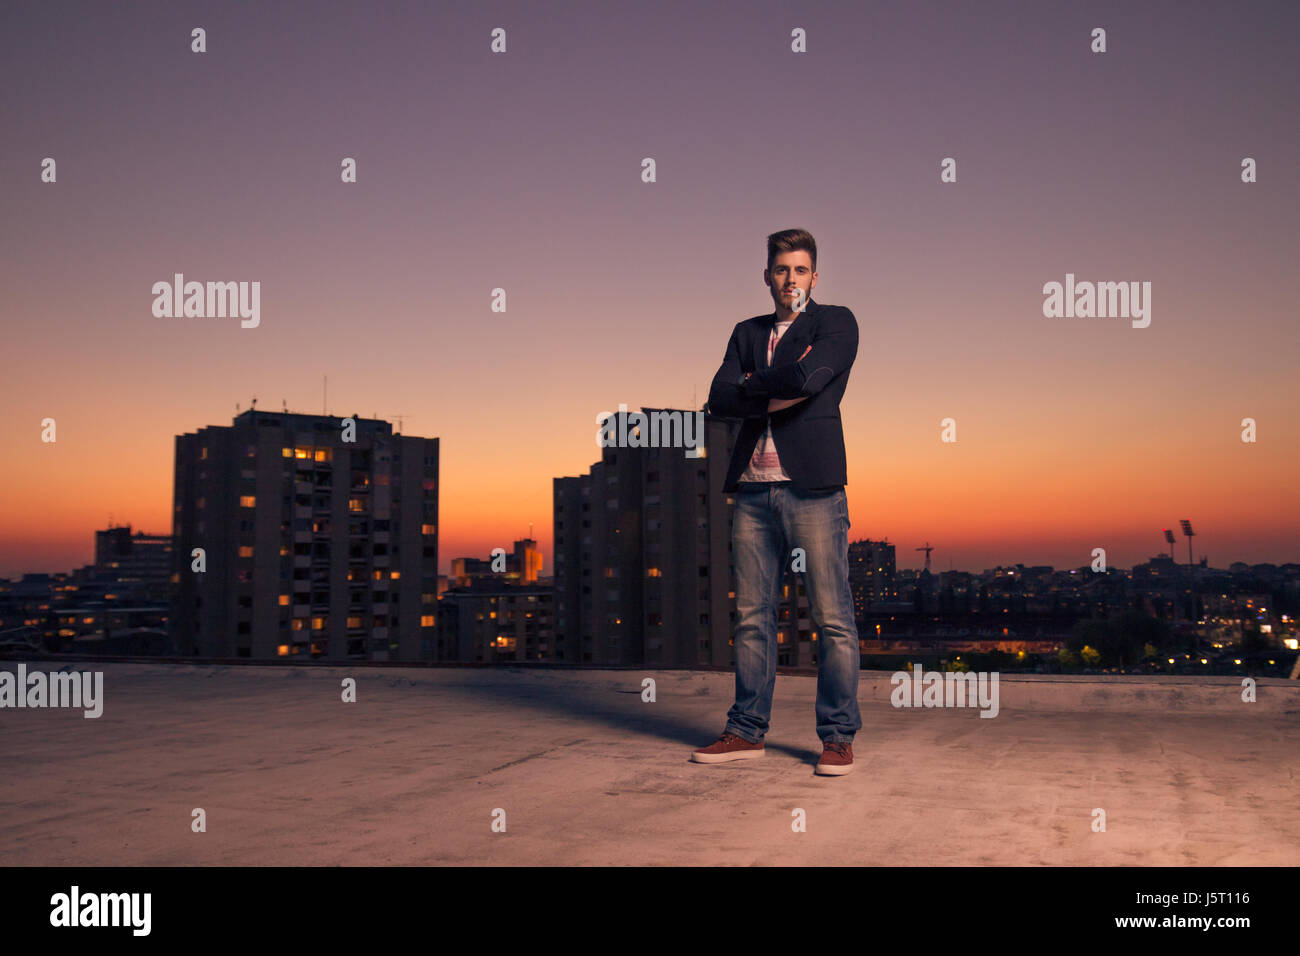 Sunset Sunrise, one young adult man only, rooftop roof, city lights, outdoors Stock Photo